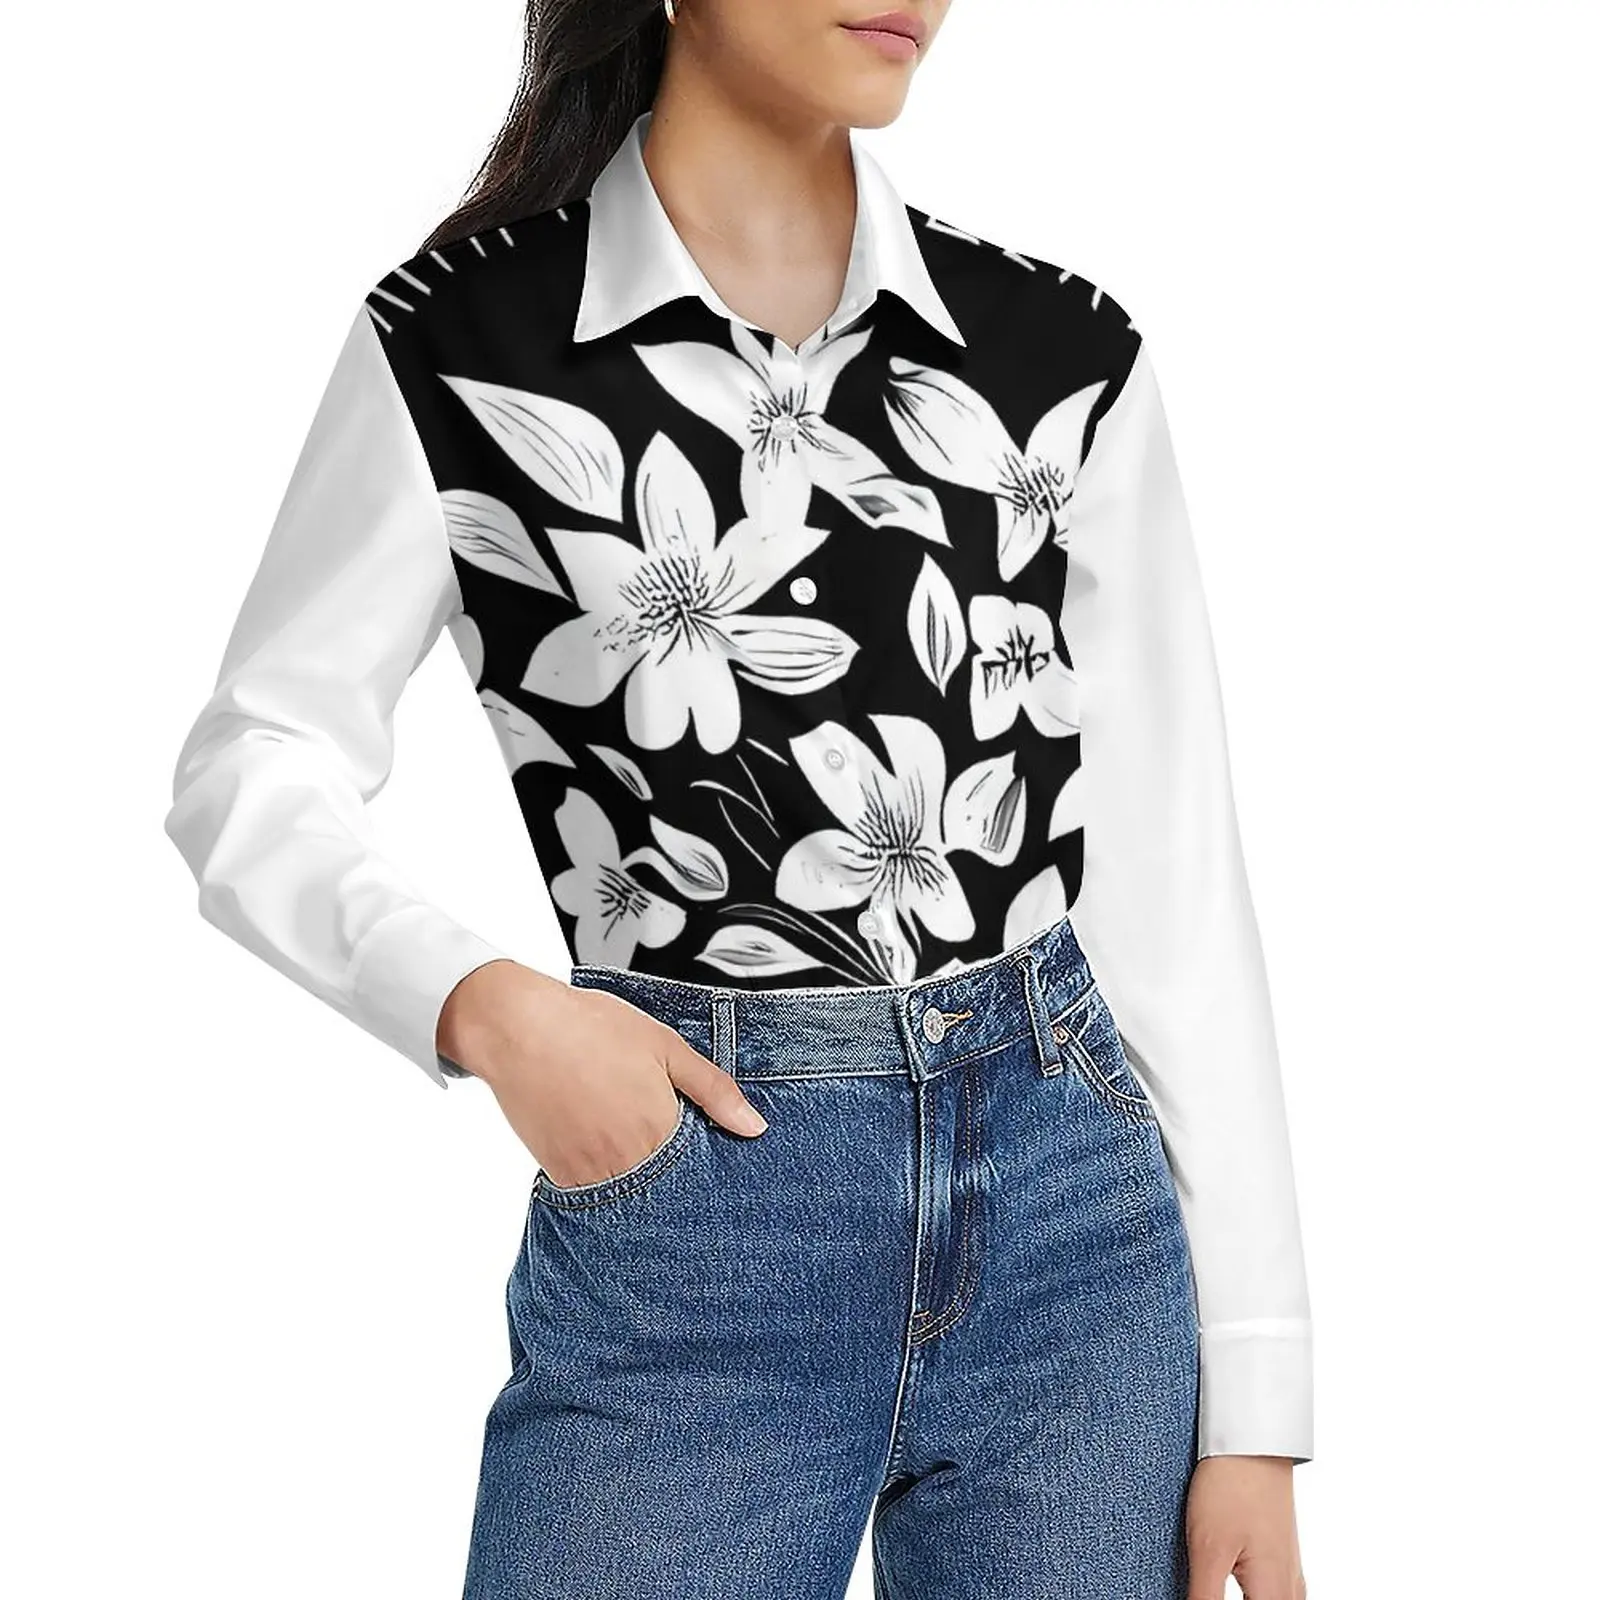 

Flower Pattern Women's Spring/Summer Long Sleeve Lining Customizable High Quality Shirt Plus Size Fashion Style 2023